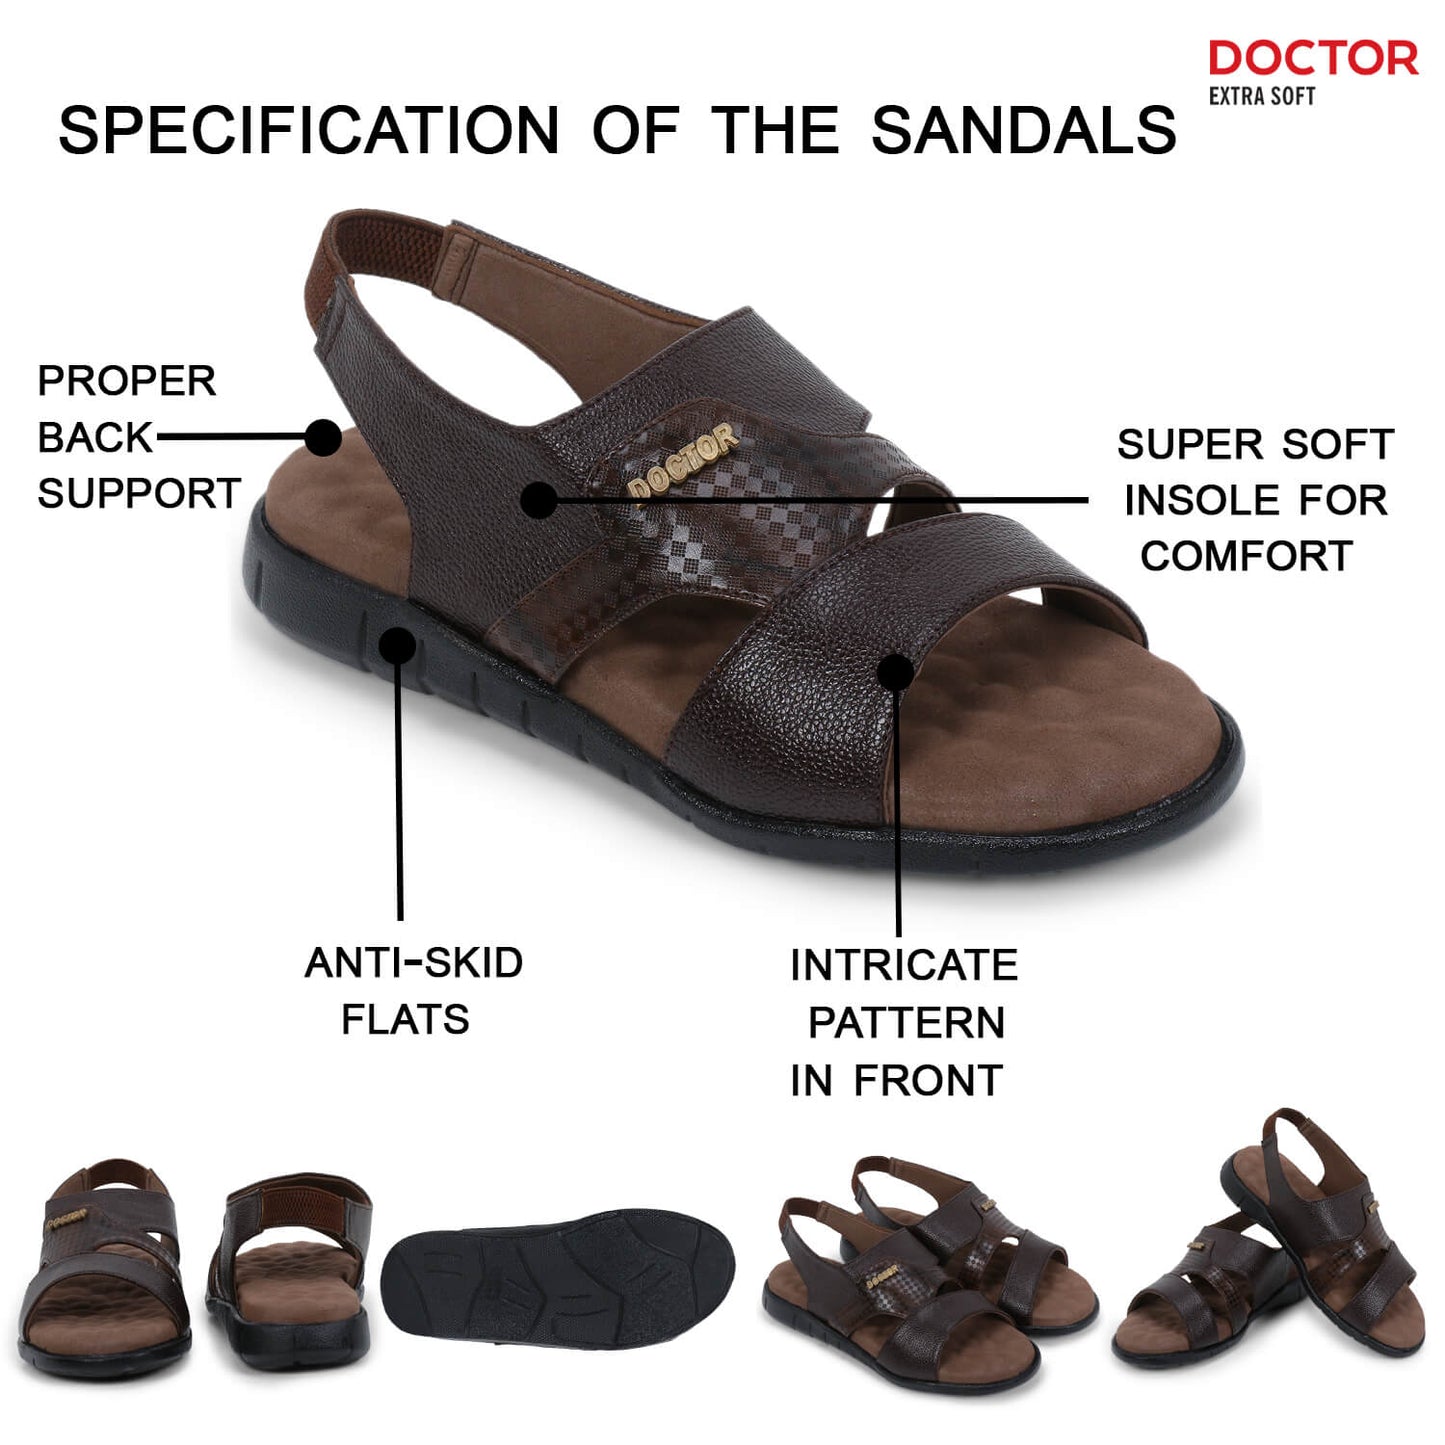 Doctor Extra Soft L-7, Orthopedic Diabetic Durable Footwear Daily Use Casual Wear Stylish Chappal/Sandals for Men's-Gents-Boy's